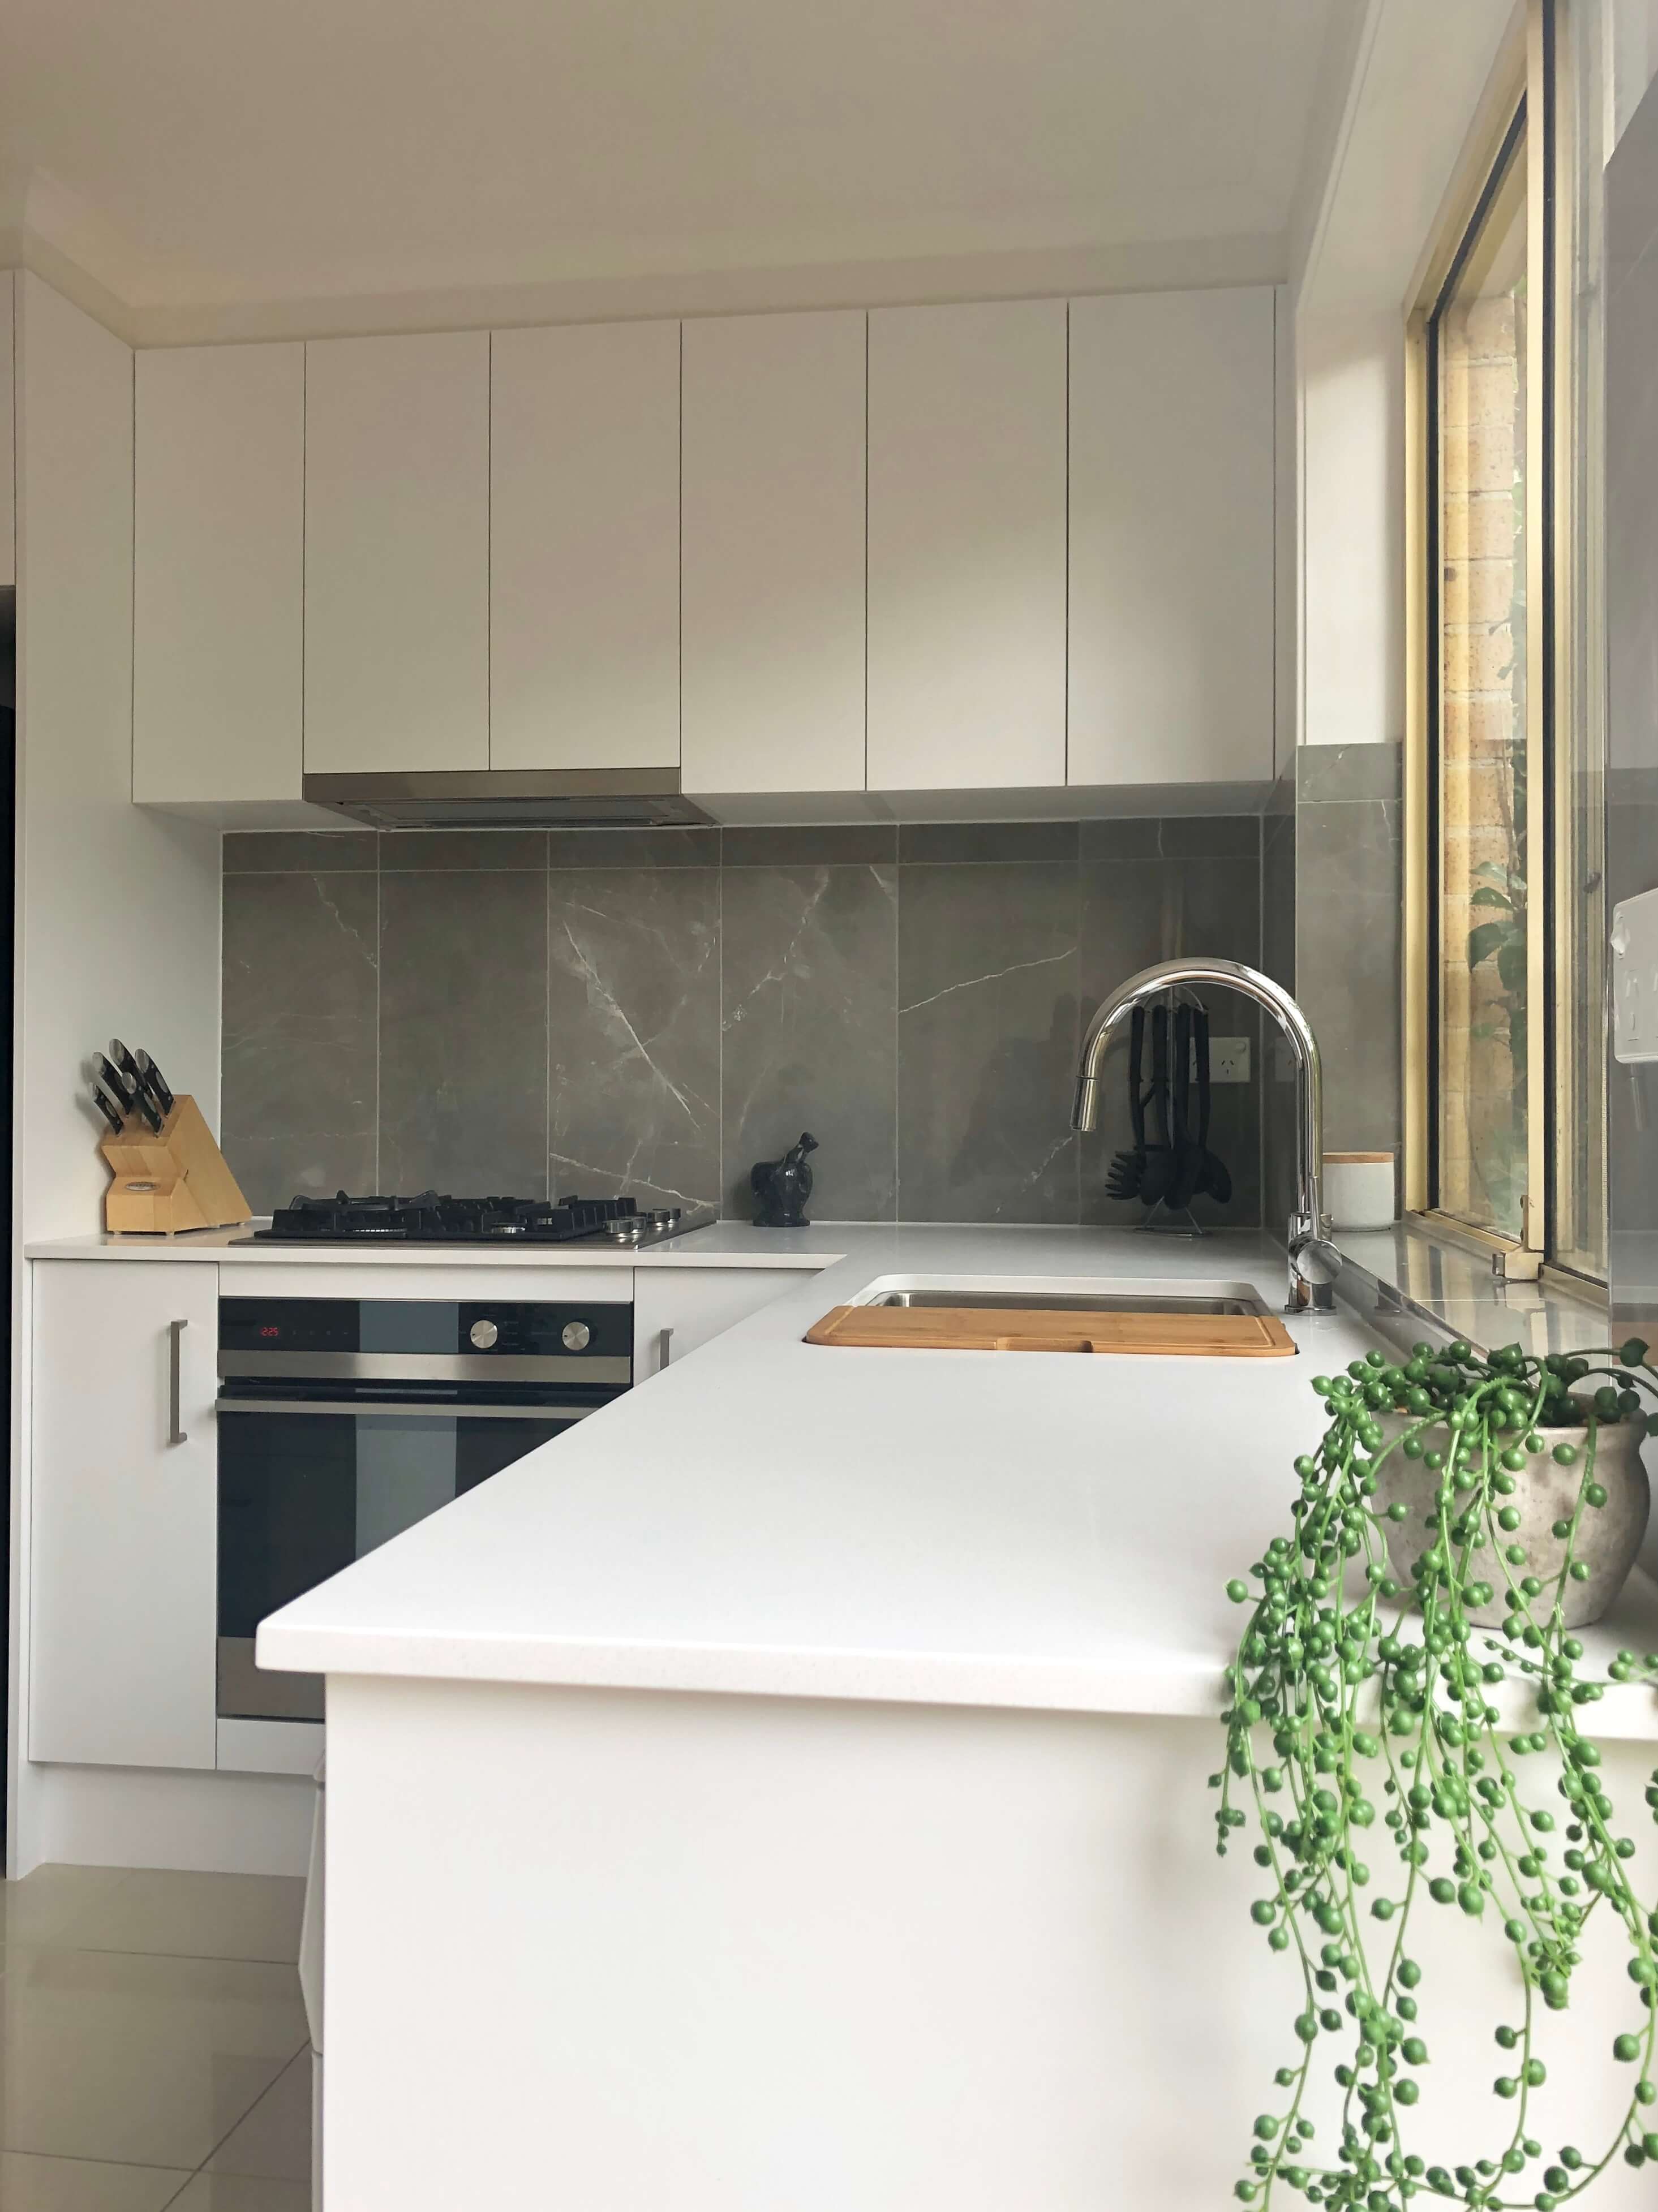 Stunning tiled splashback using faux marble 300 x 600mm porcelain rectified tile and beautiful undermount sink with arc mixer tap - kitchen renovation by Master Bathrooms & Kitchens.